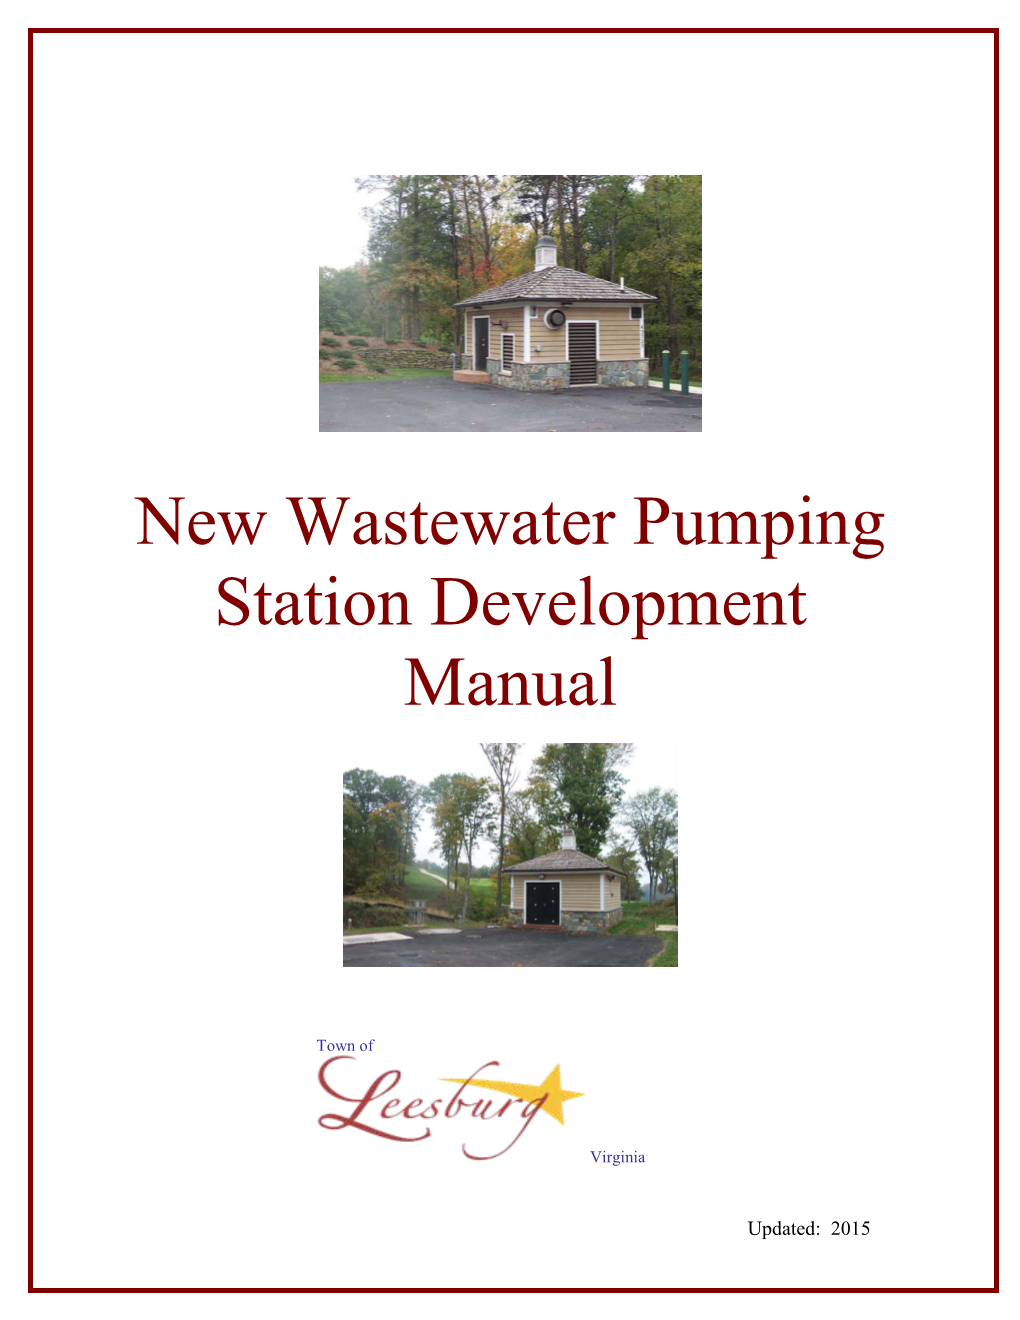 New Wastewater Pumping Station Development Manual Table of Contents Page 1 of 2 Page Number I